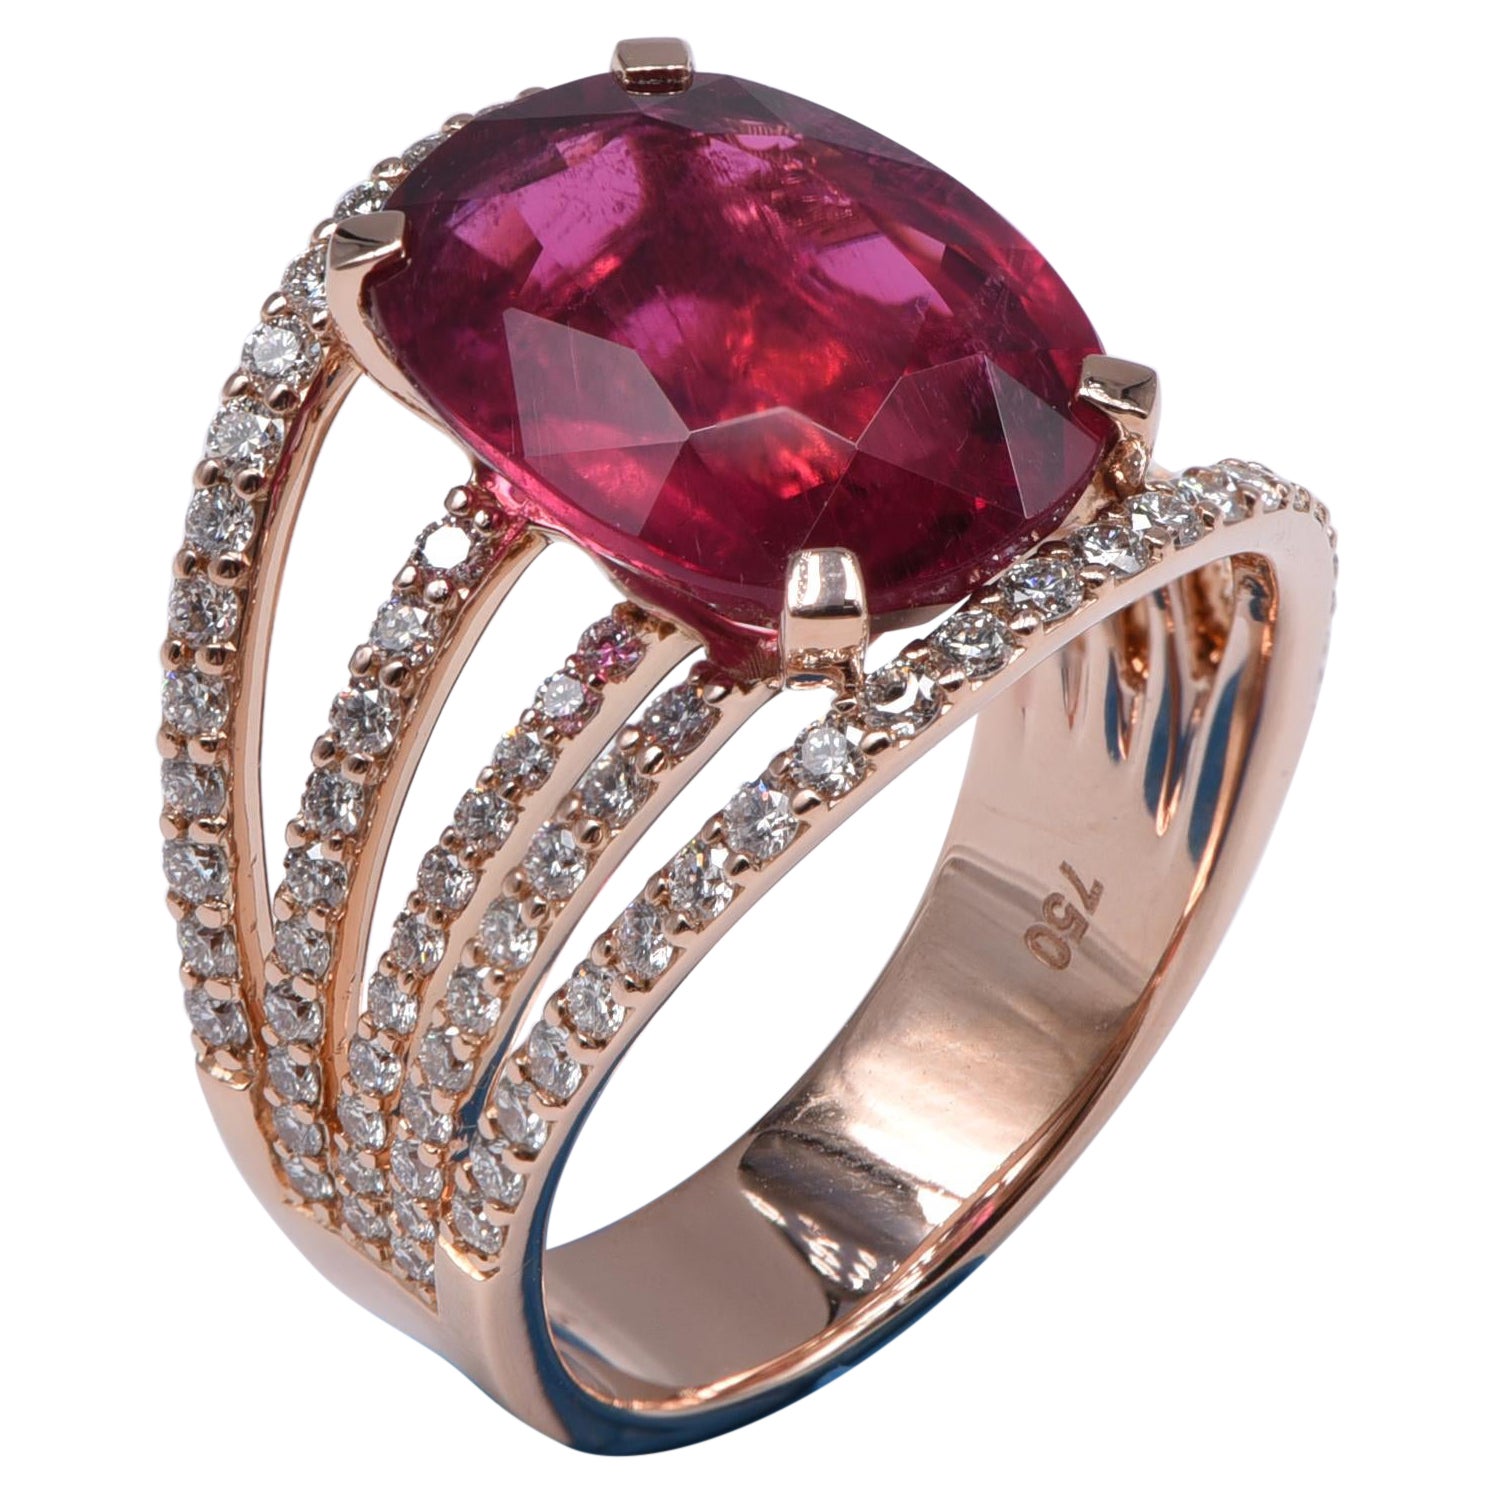 18kt Rose Gold Ring with White Diamonds and Oval Shaped Rubellite Center Stone